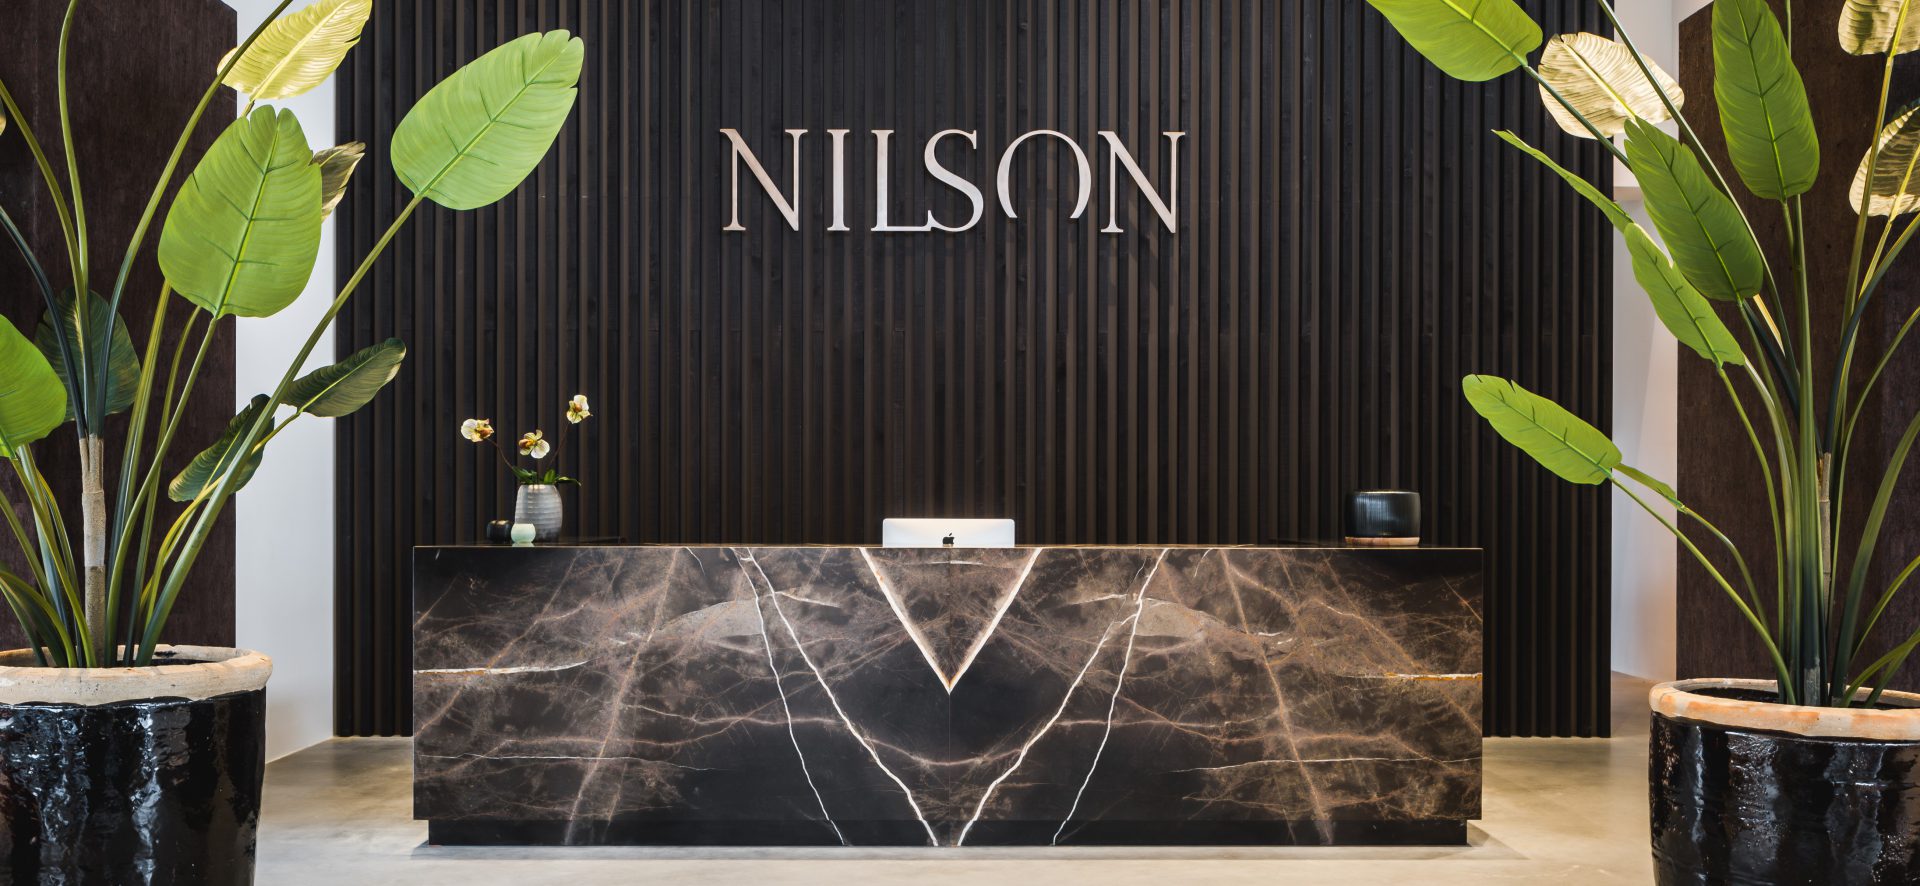 Nilson Beds | Amersfoort (NL) - Experience centre